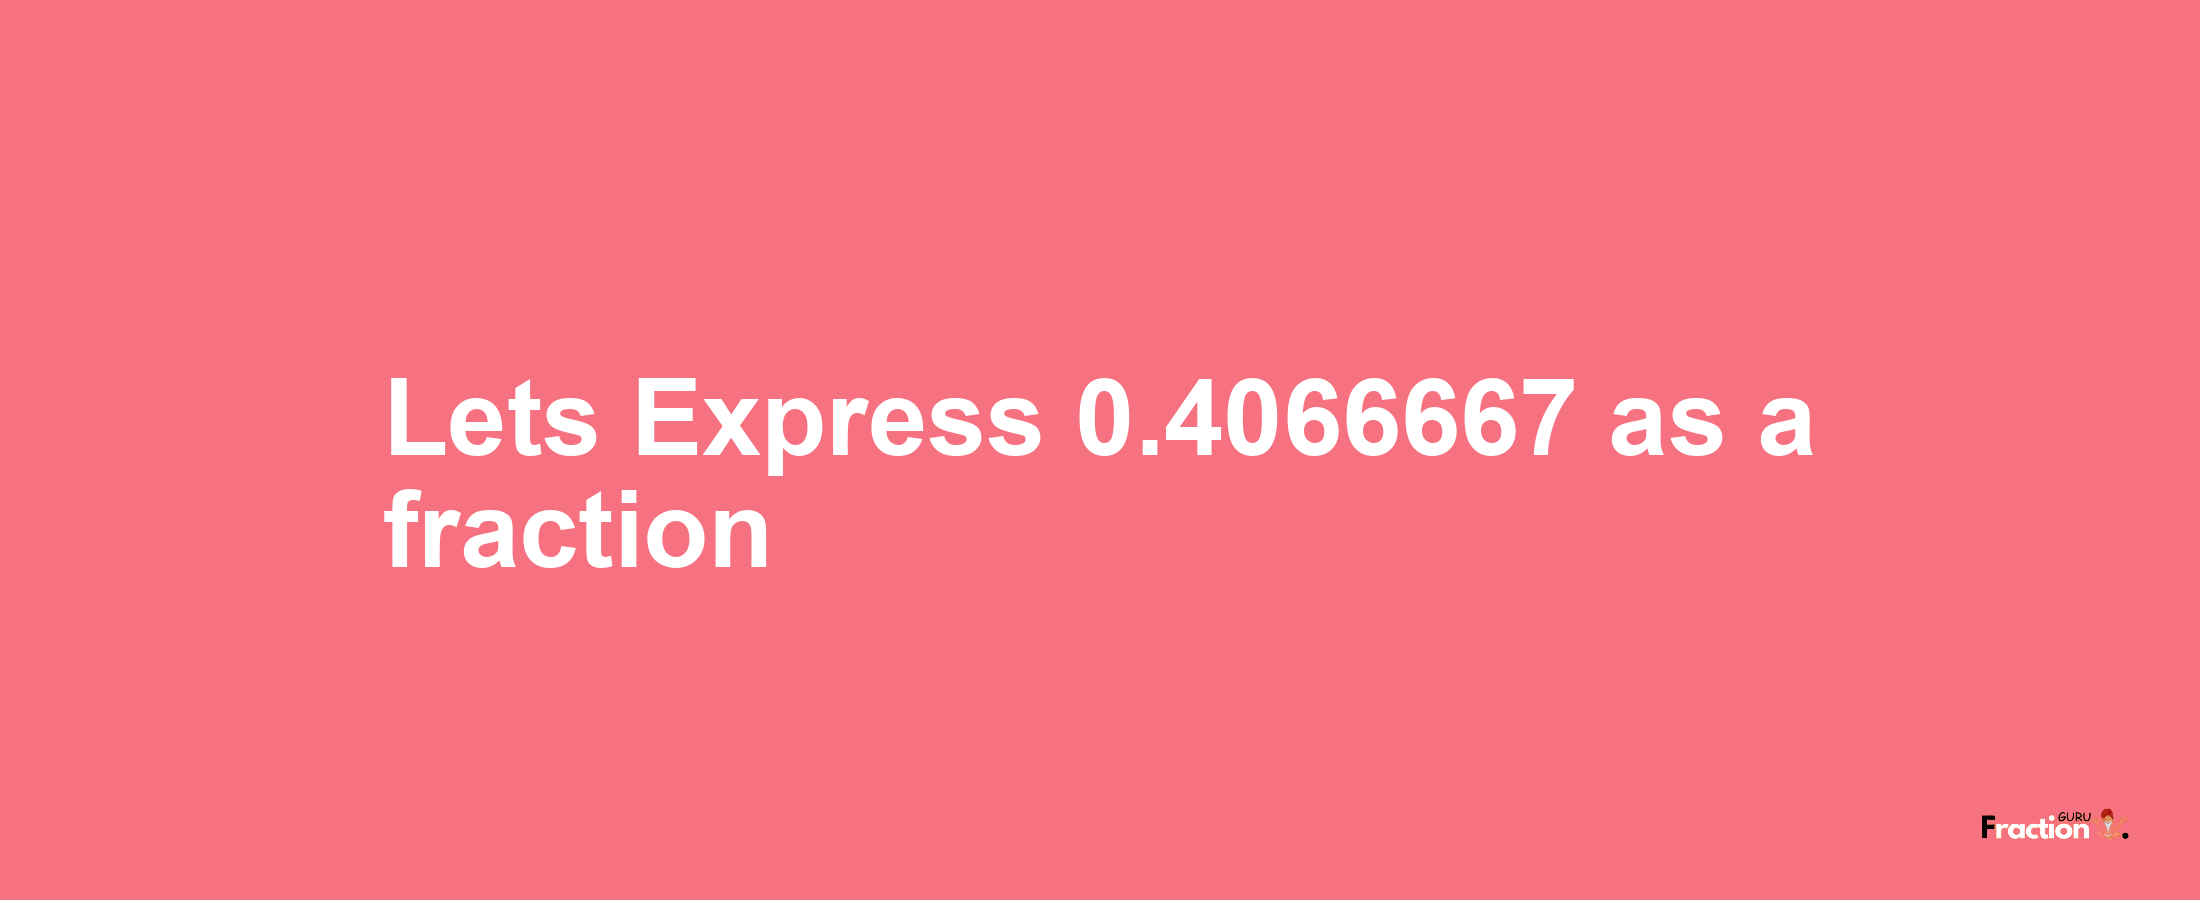 Lets Express 0.4066667 as afraction